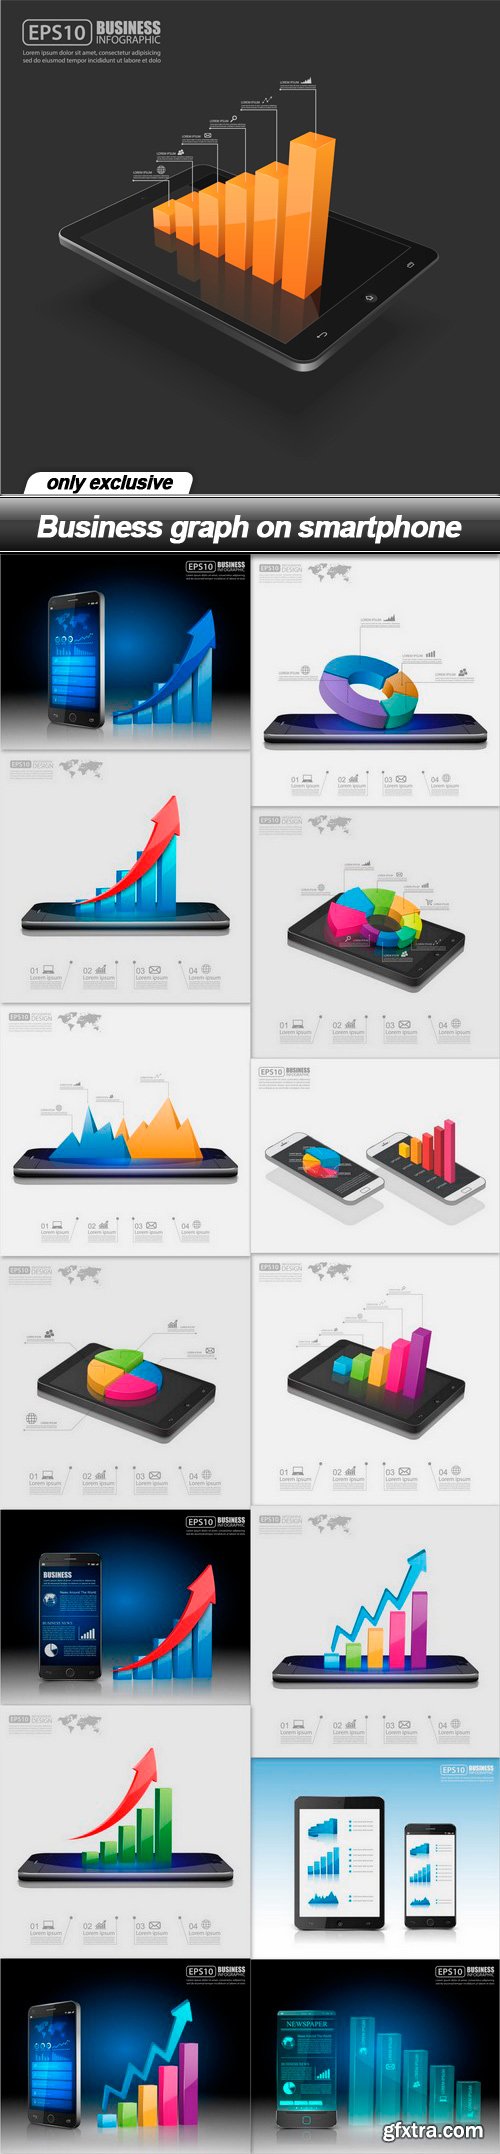 Business graph on smartphone - 15 EPS